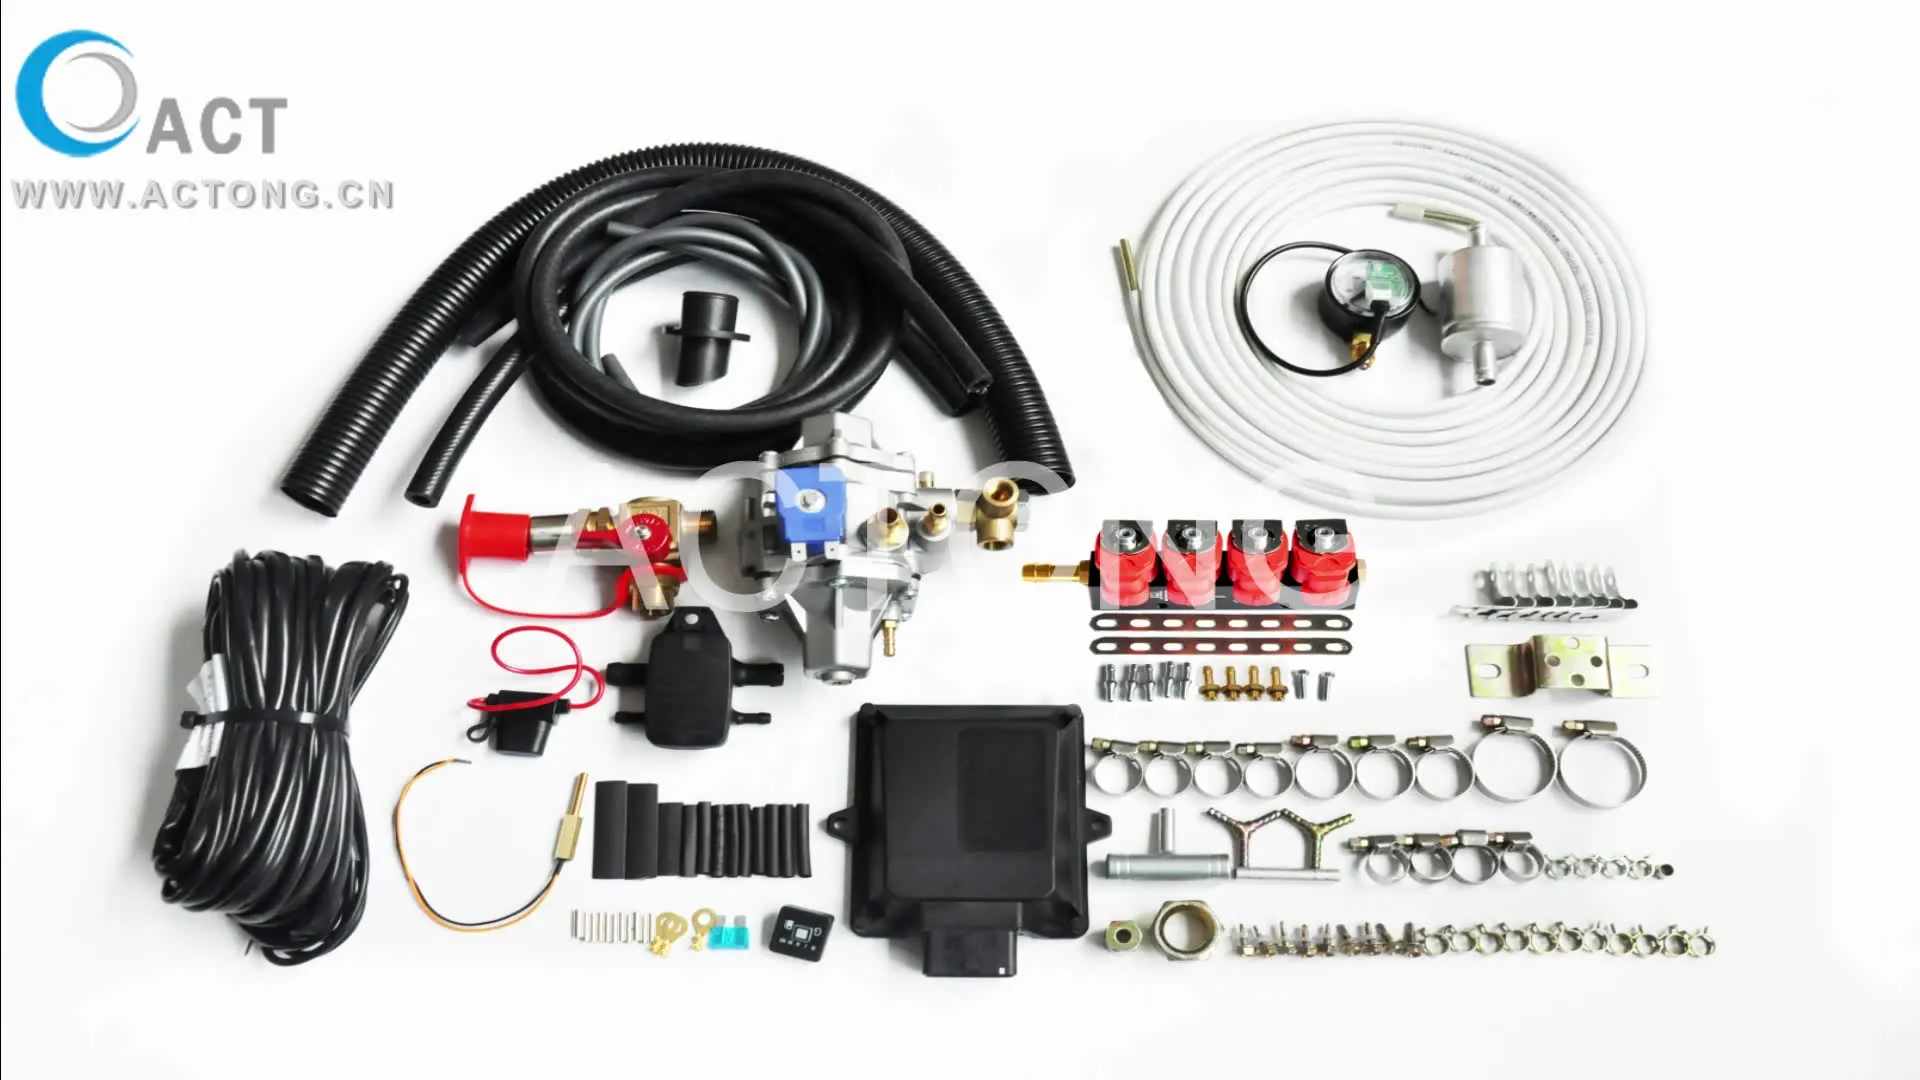 

ACT fuel injection kit 4 Auto a gasolina Automobile conversion kits gas equipment 4 cylinder CNG kits